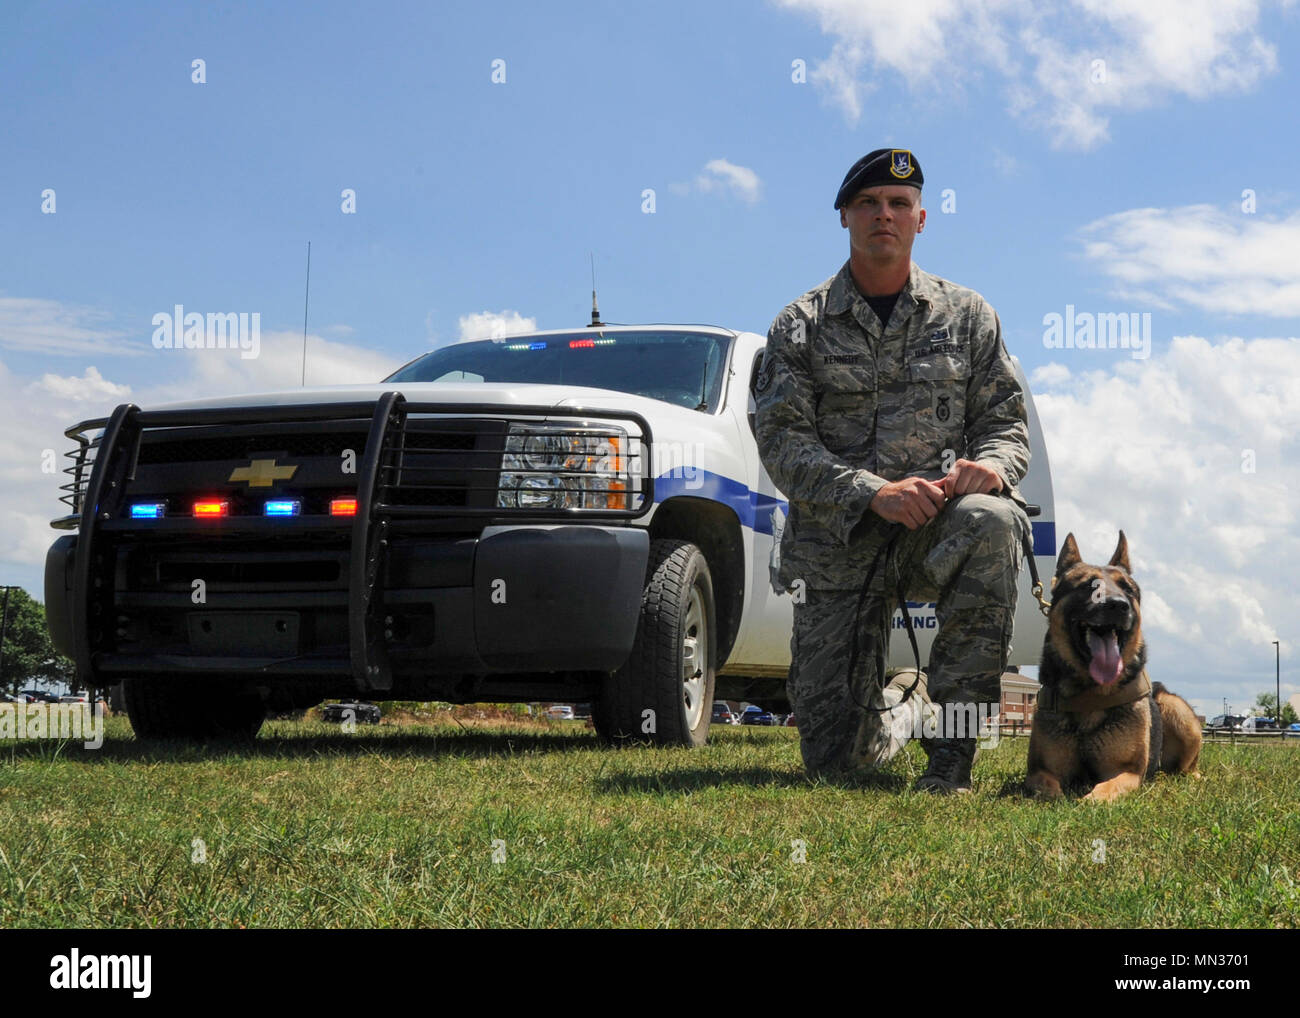 U.S. Air Force Staff Sgt. Jeffrie Kennedy, 633rd Security Forces Squadron military working dog handler, and his partner, Toni, 633rd SFS MWD, pose for a photo at Joint Base Langley-Eustis, Va., Aug. 4, 2017. Kennedy and Toni won first place in the “Iron Dawg” competition, hosted by Naval Air Station Oceana, Va., July 31, 2017. (U.S. Air Force photo/Airman 1st Class Anthony Nin Leclerec) Stock Photo